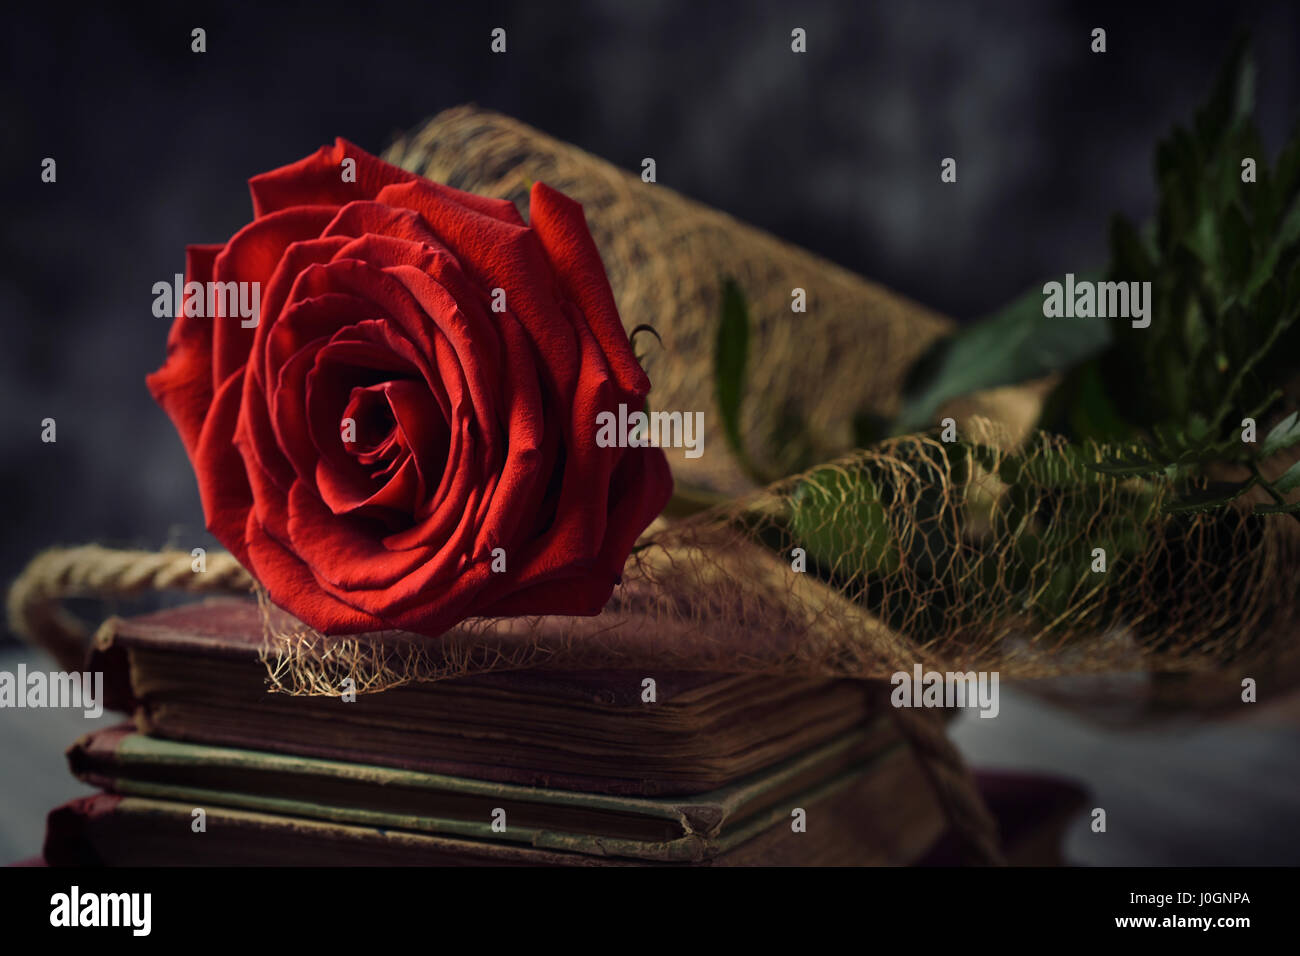 a red rose on a pile of old books, on a rustic surface, for Sant Jordi, the Catalan name for Saint Georges Day, when it is tradition to give red roses Stock Photo